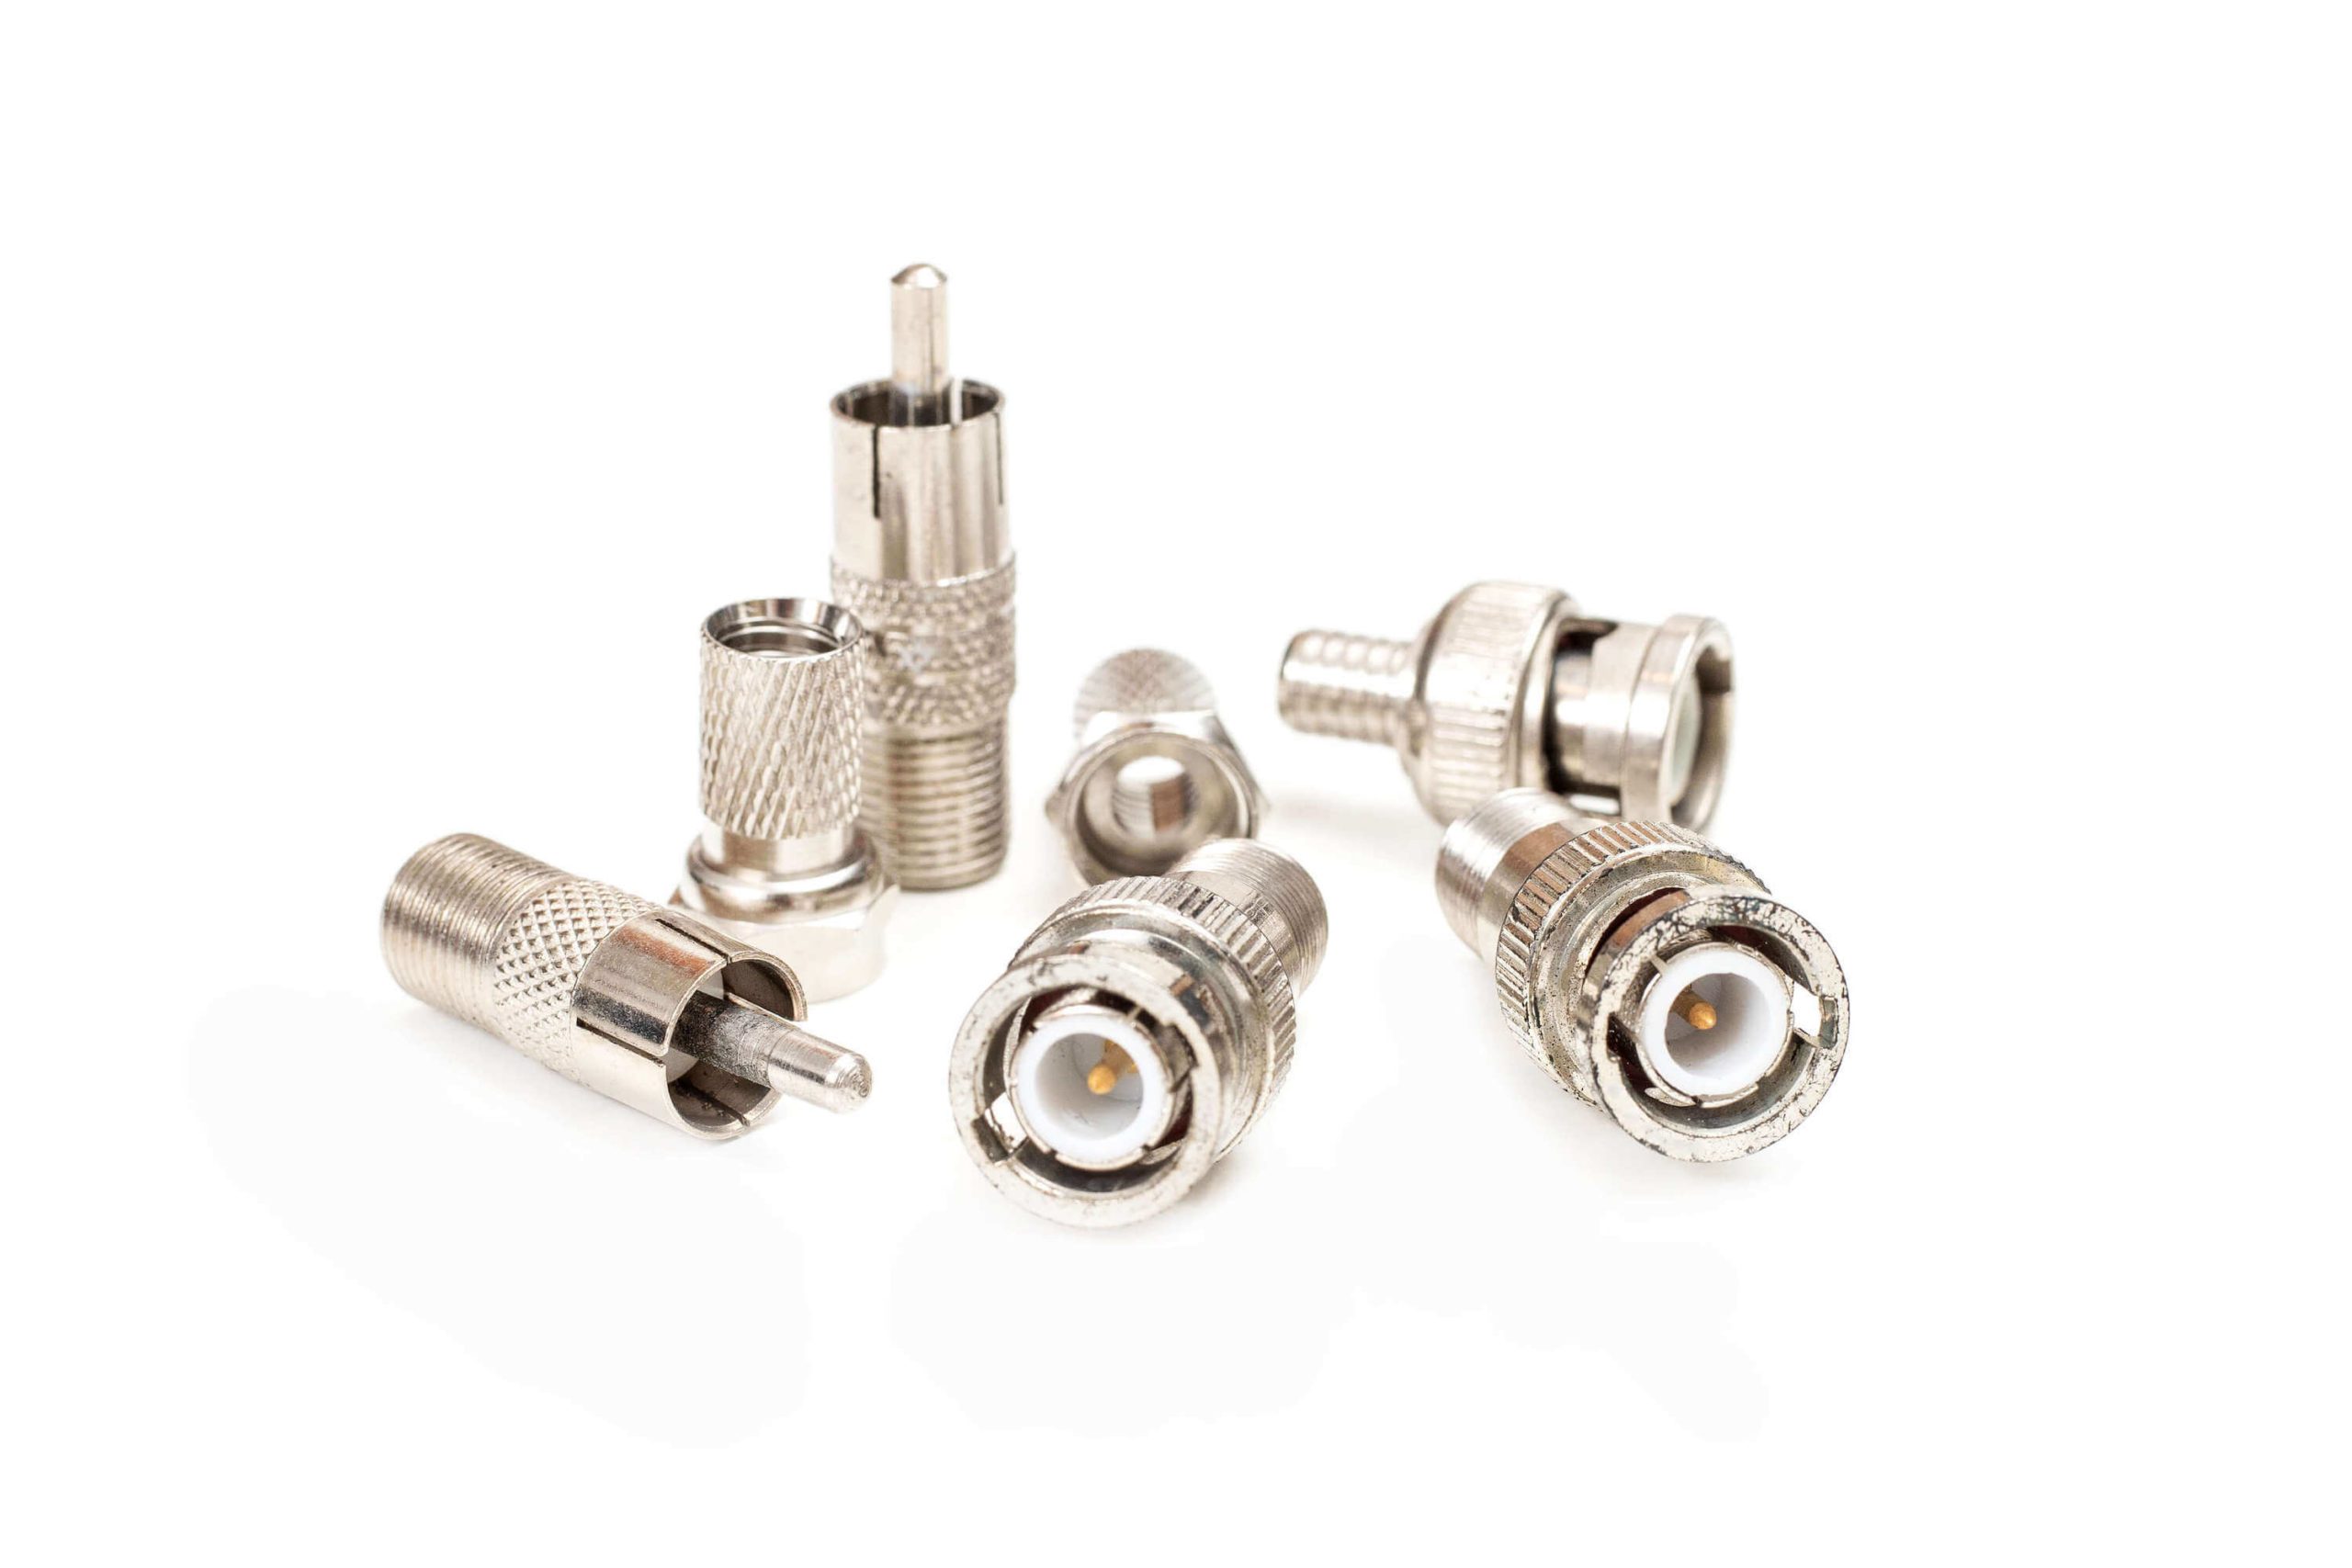 Connector parts for television audio systems